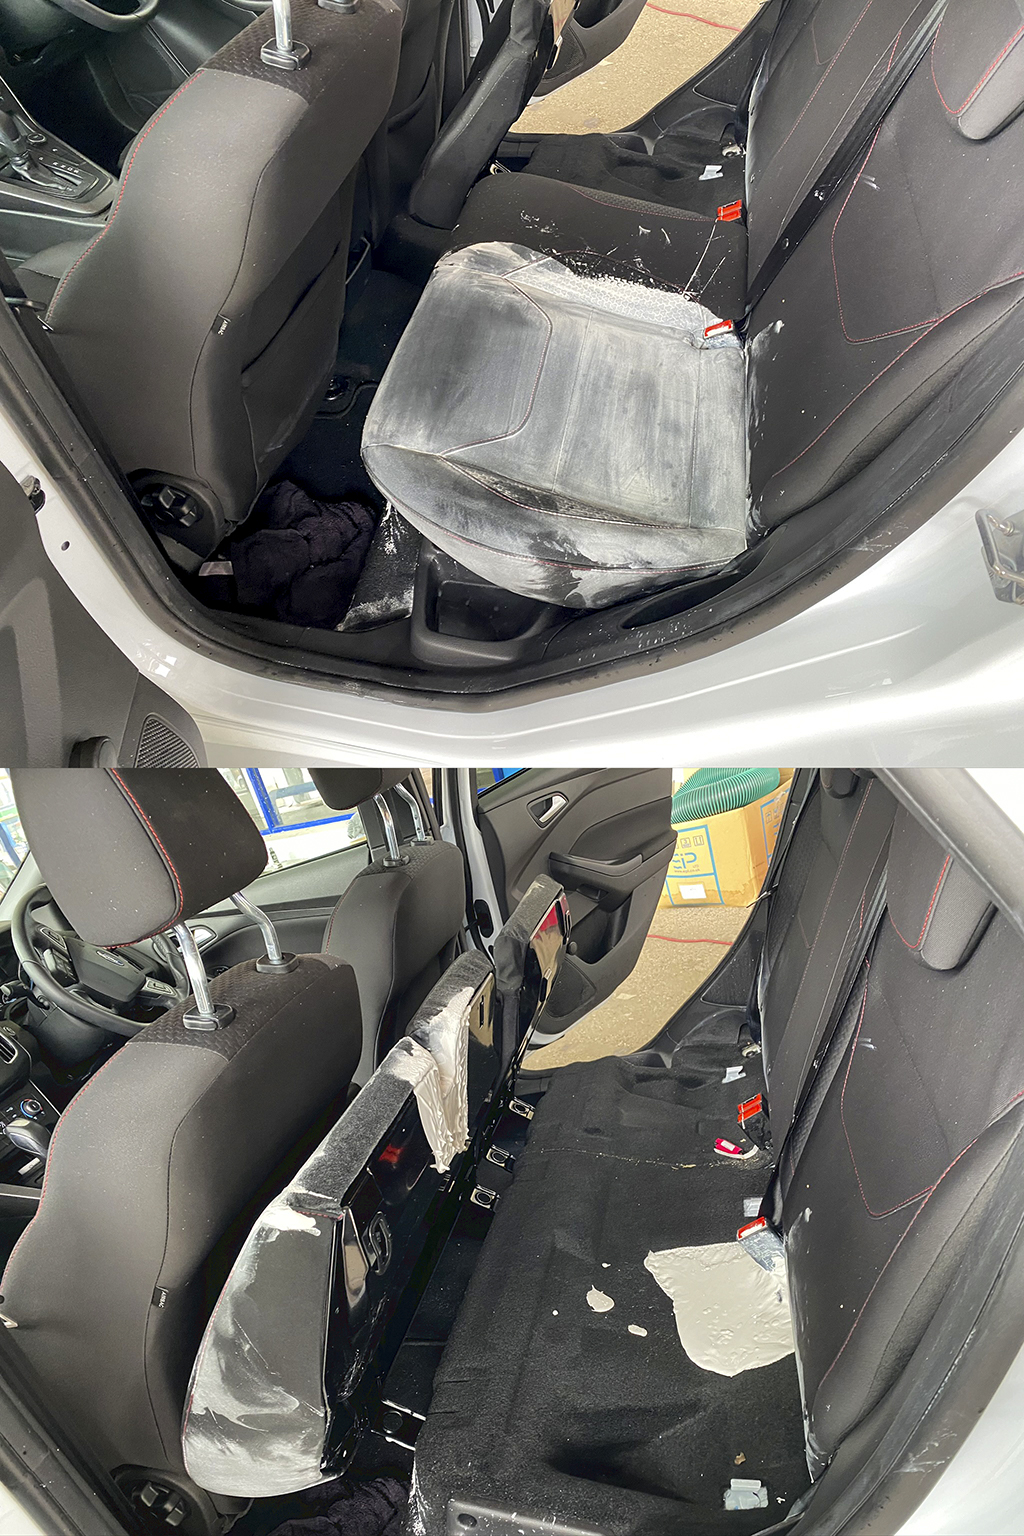 How To Get Spray Paint Off Car Seat Guide To Plastic